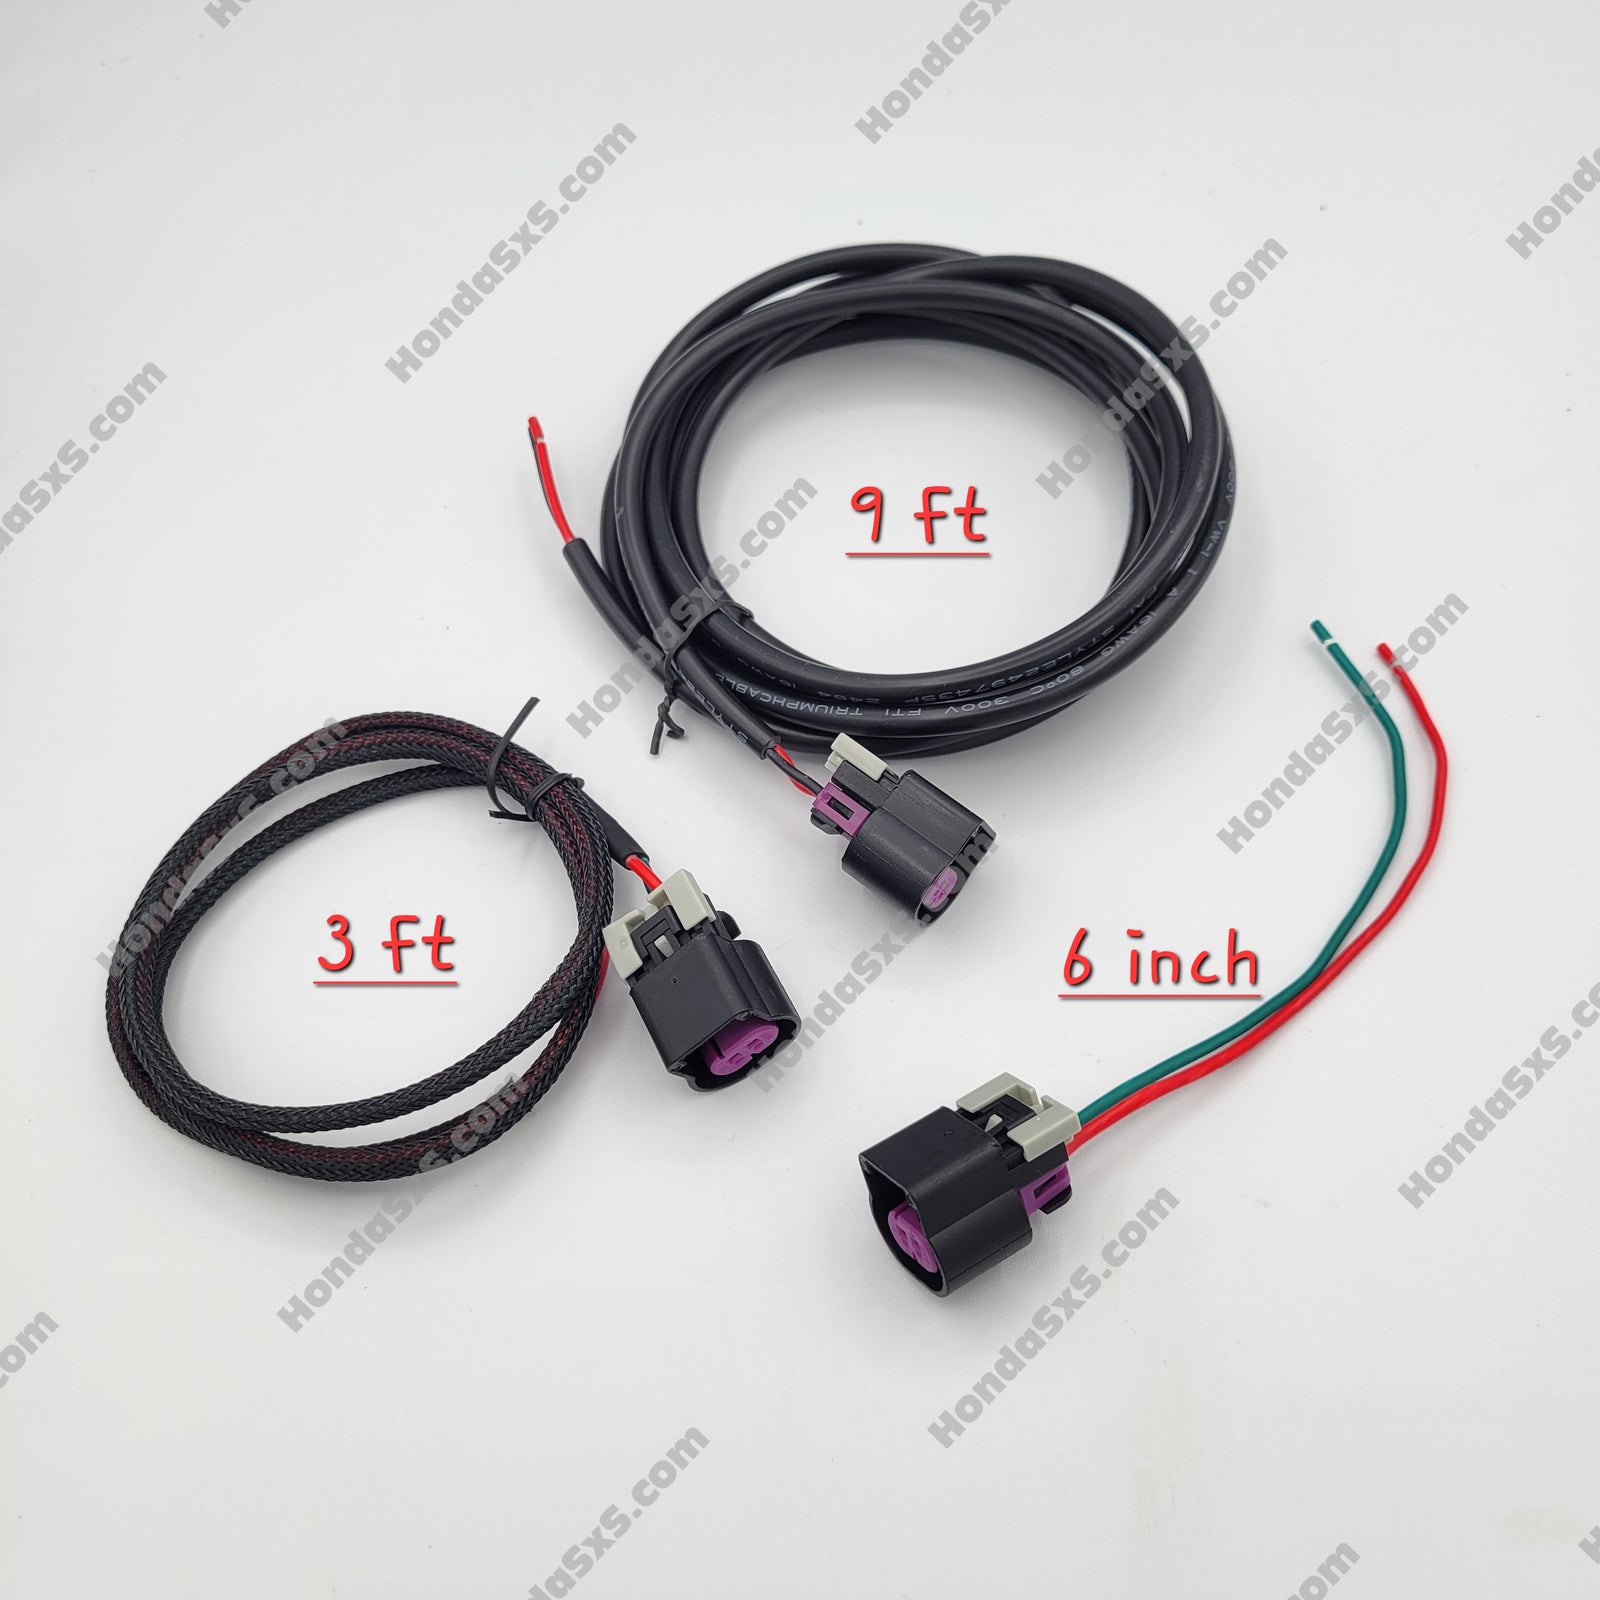 Honda Fuse Box Accessory Pigtails Wiring. - Similar to 0SZ05-HL6-A00